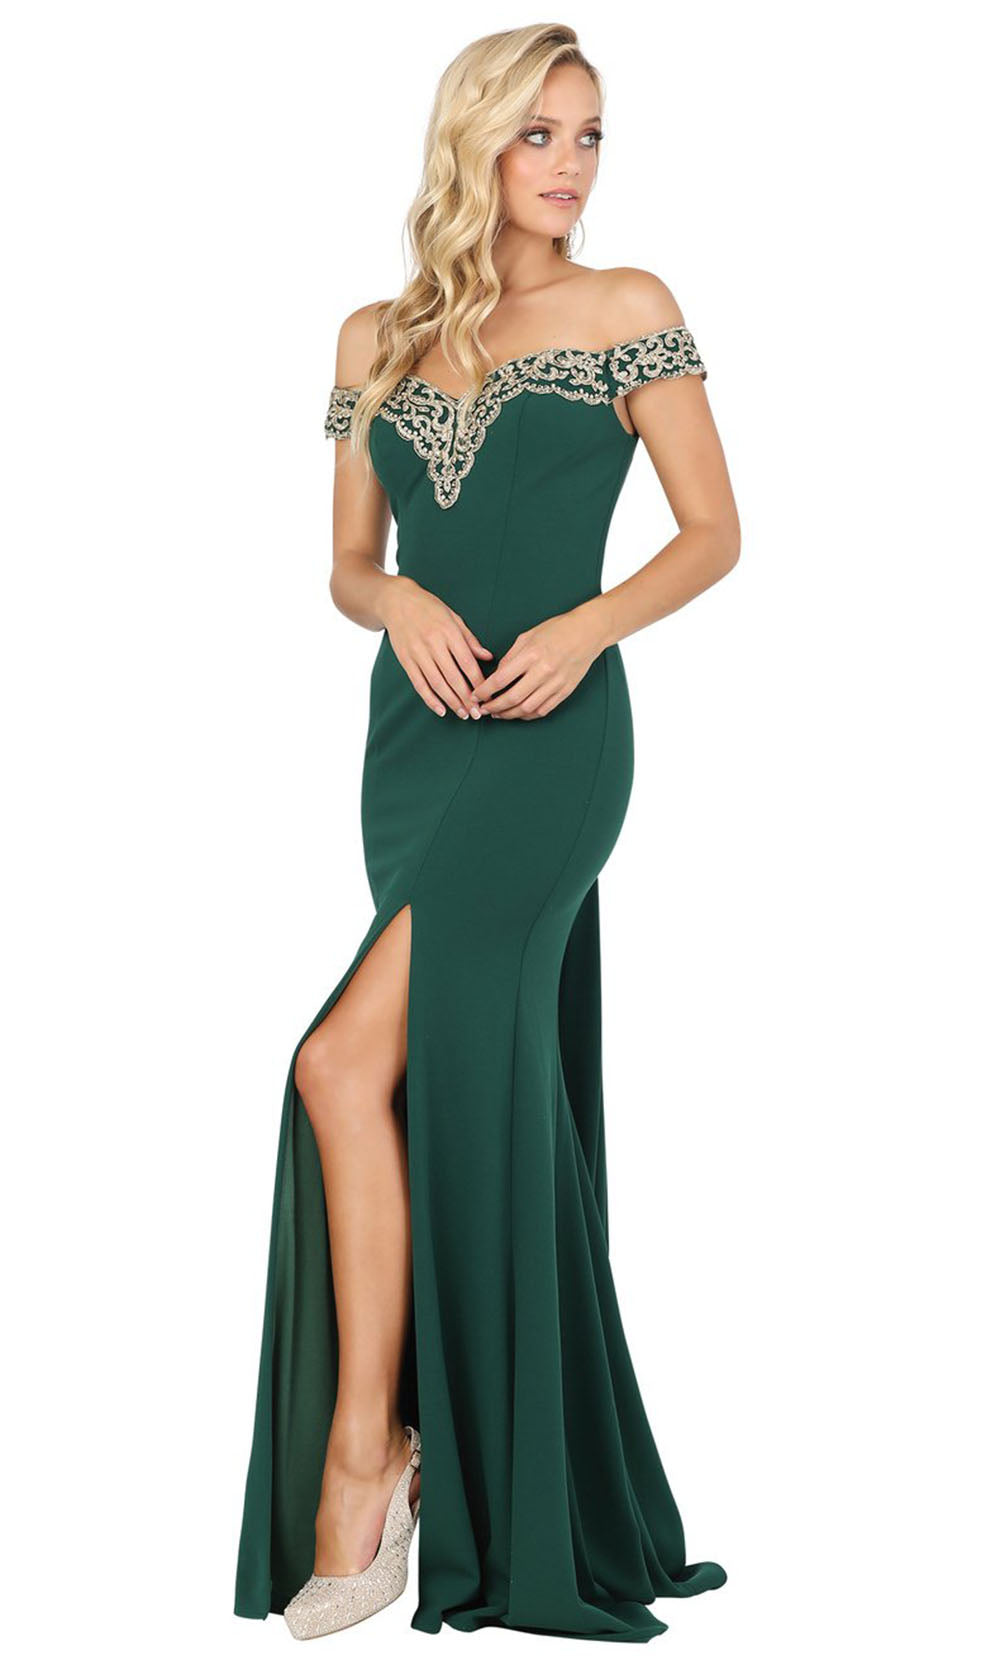 Dancing Queen - 4004 Lace Trim Off Shoulder High Slit Gown In Green